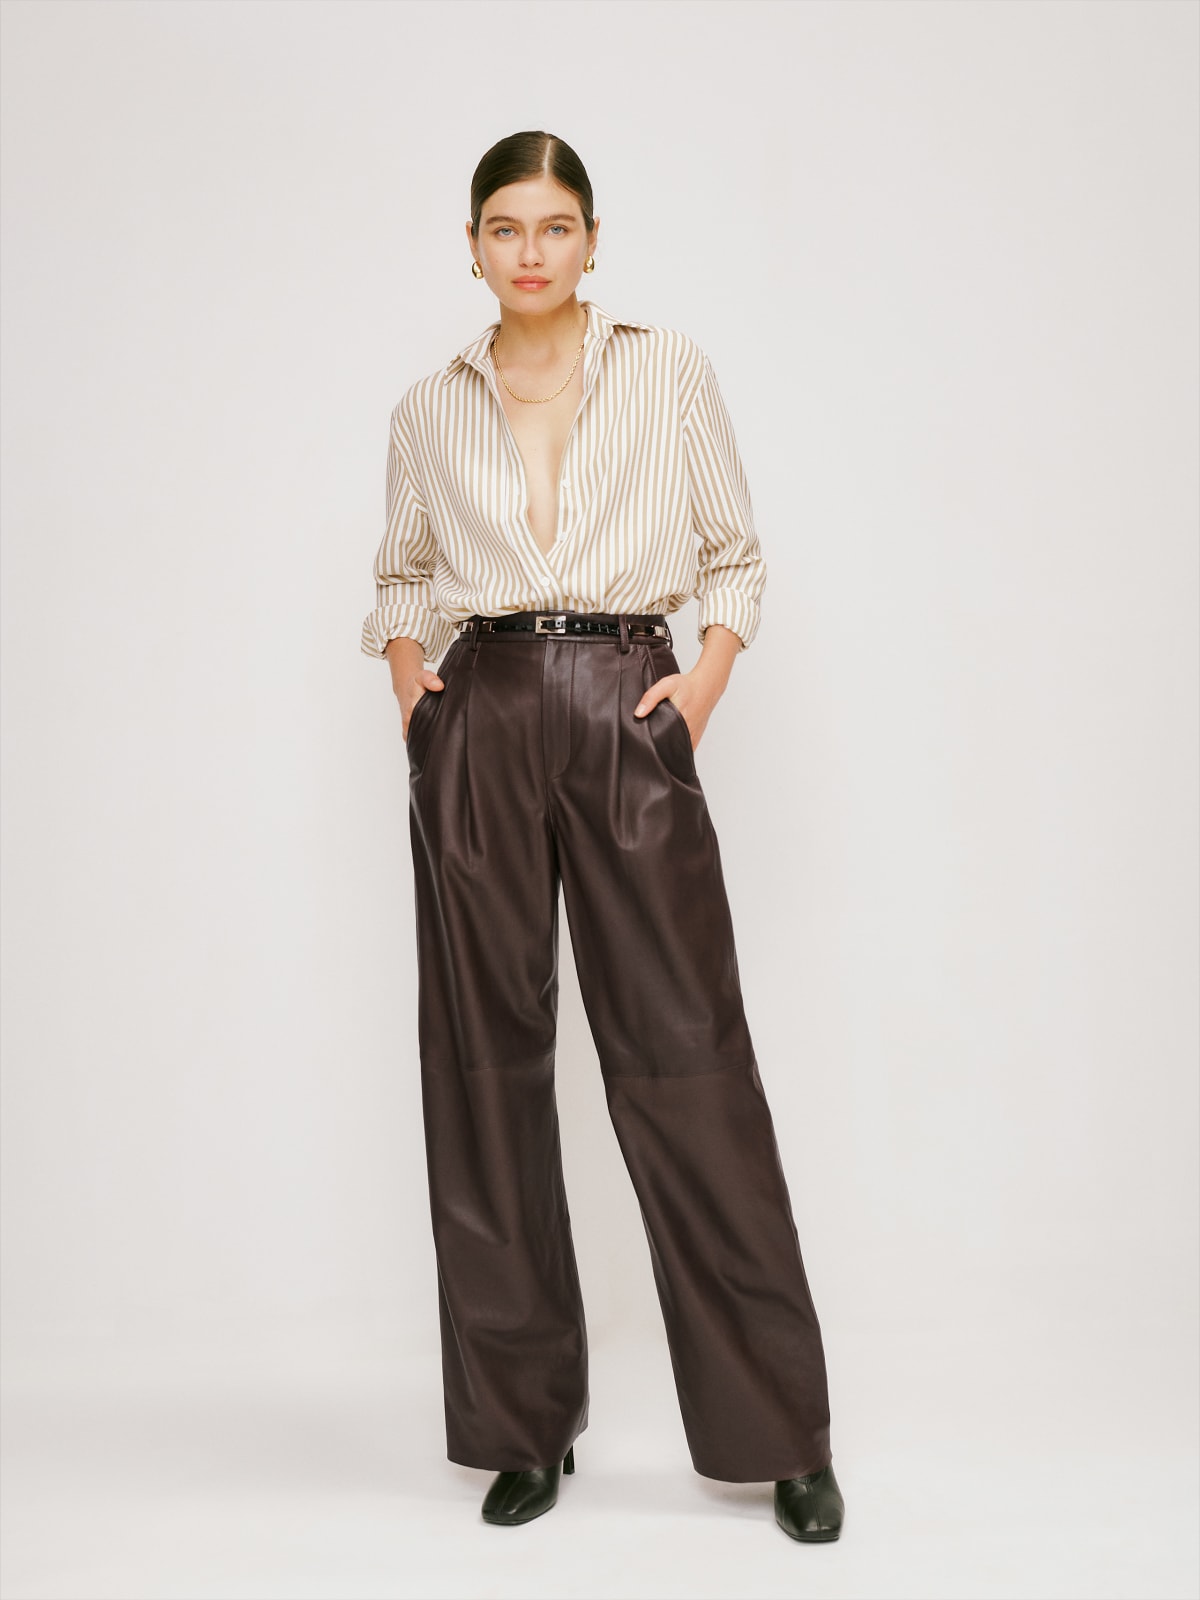 reformation chocolate brown high waisted loose leg leather pant. They have a button and zip fly with belt loops and side pockets. They are fully lined. 